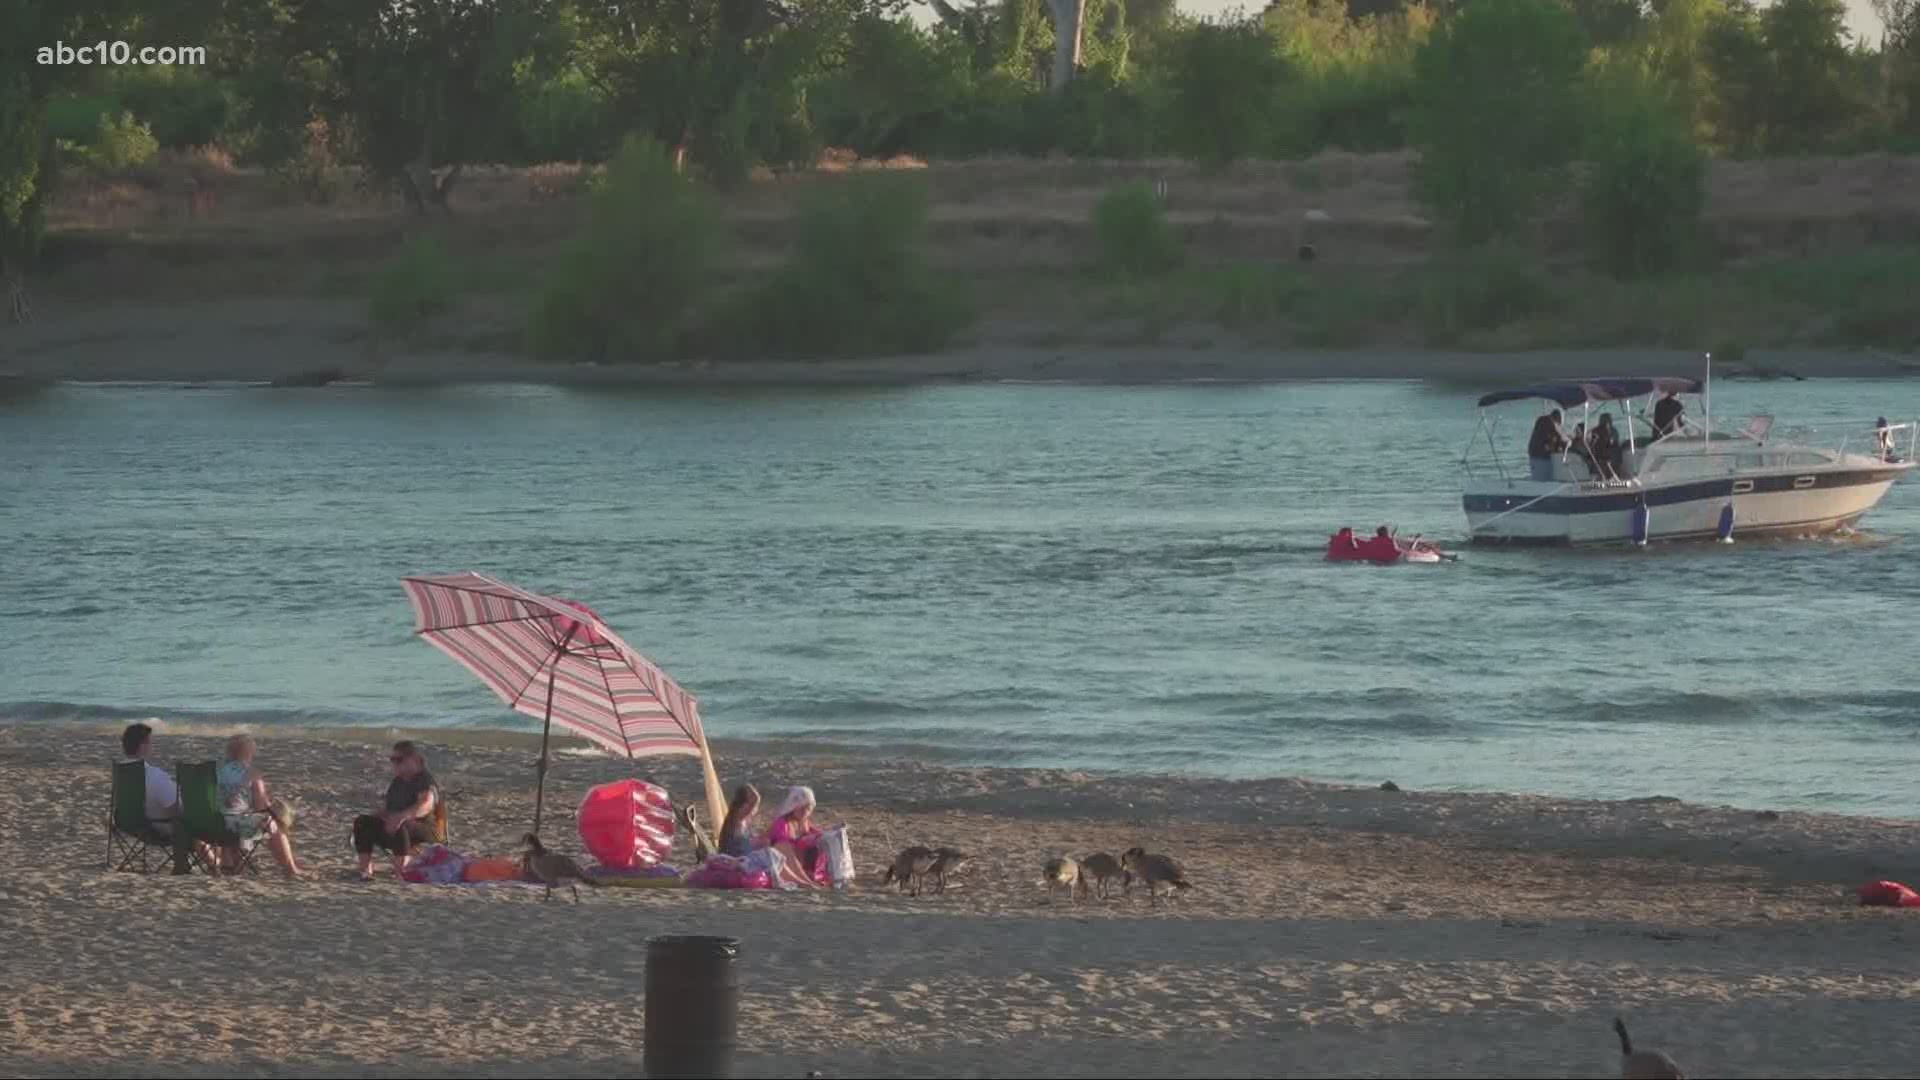 Sacramento County's top health officer said because of the recent surge, county health officials are considering stricter guidelines for outdoor gatherings.